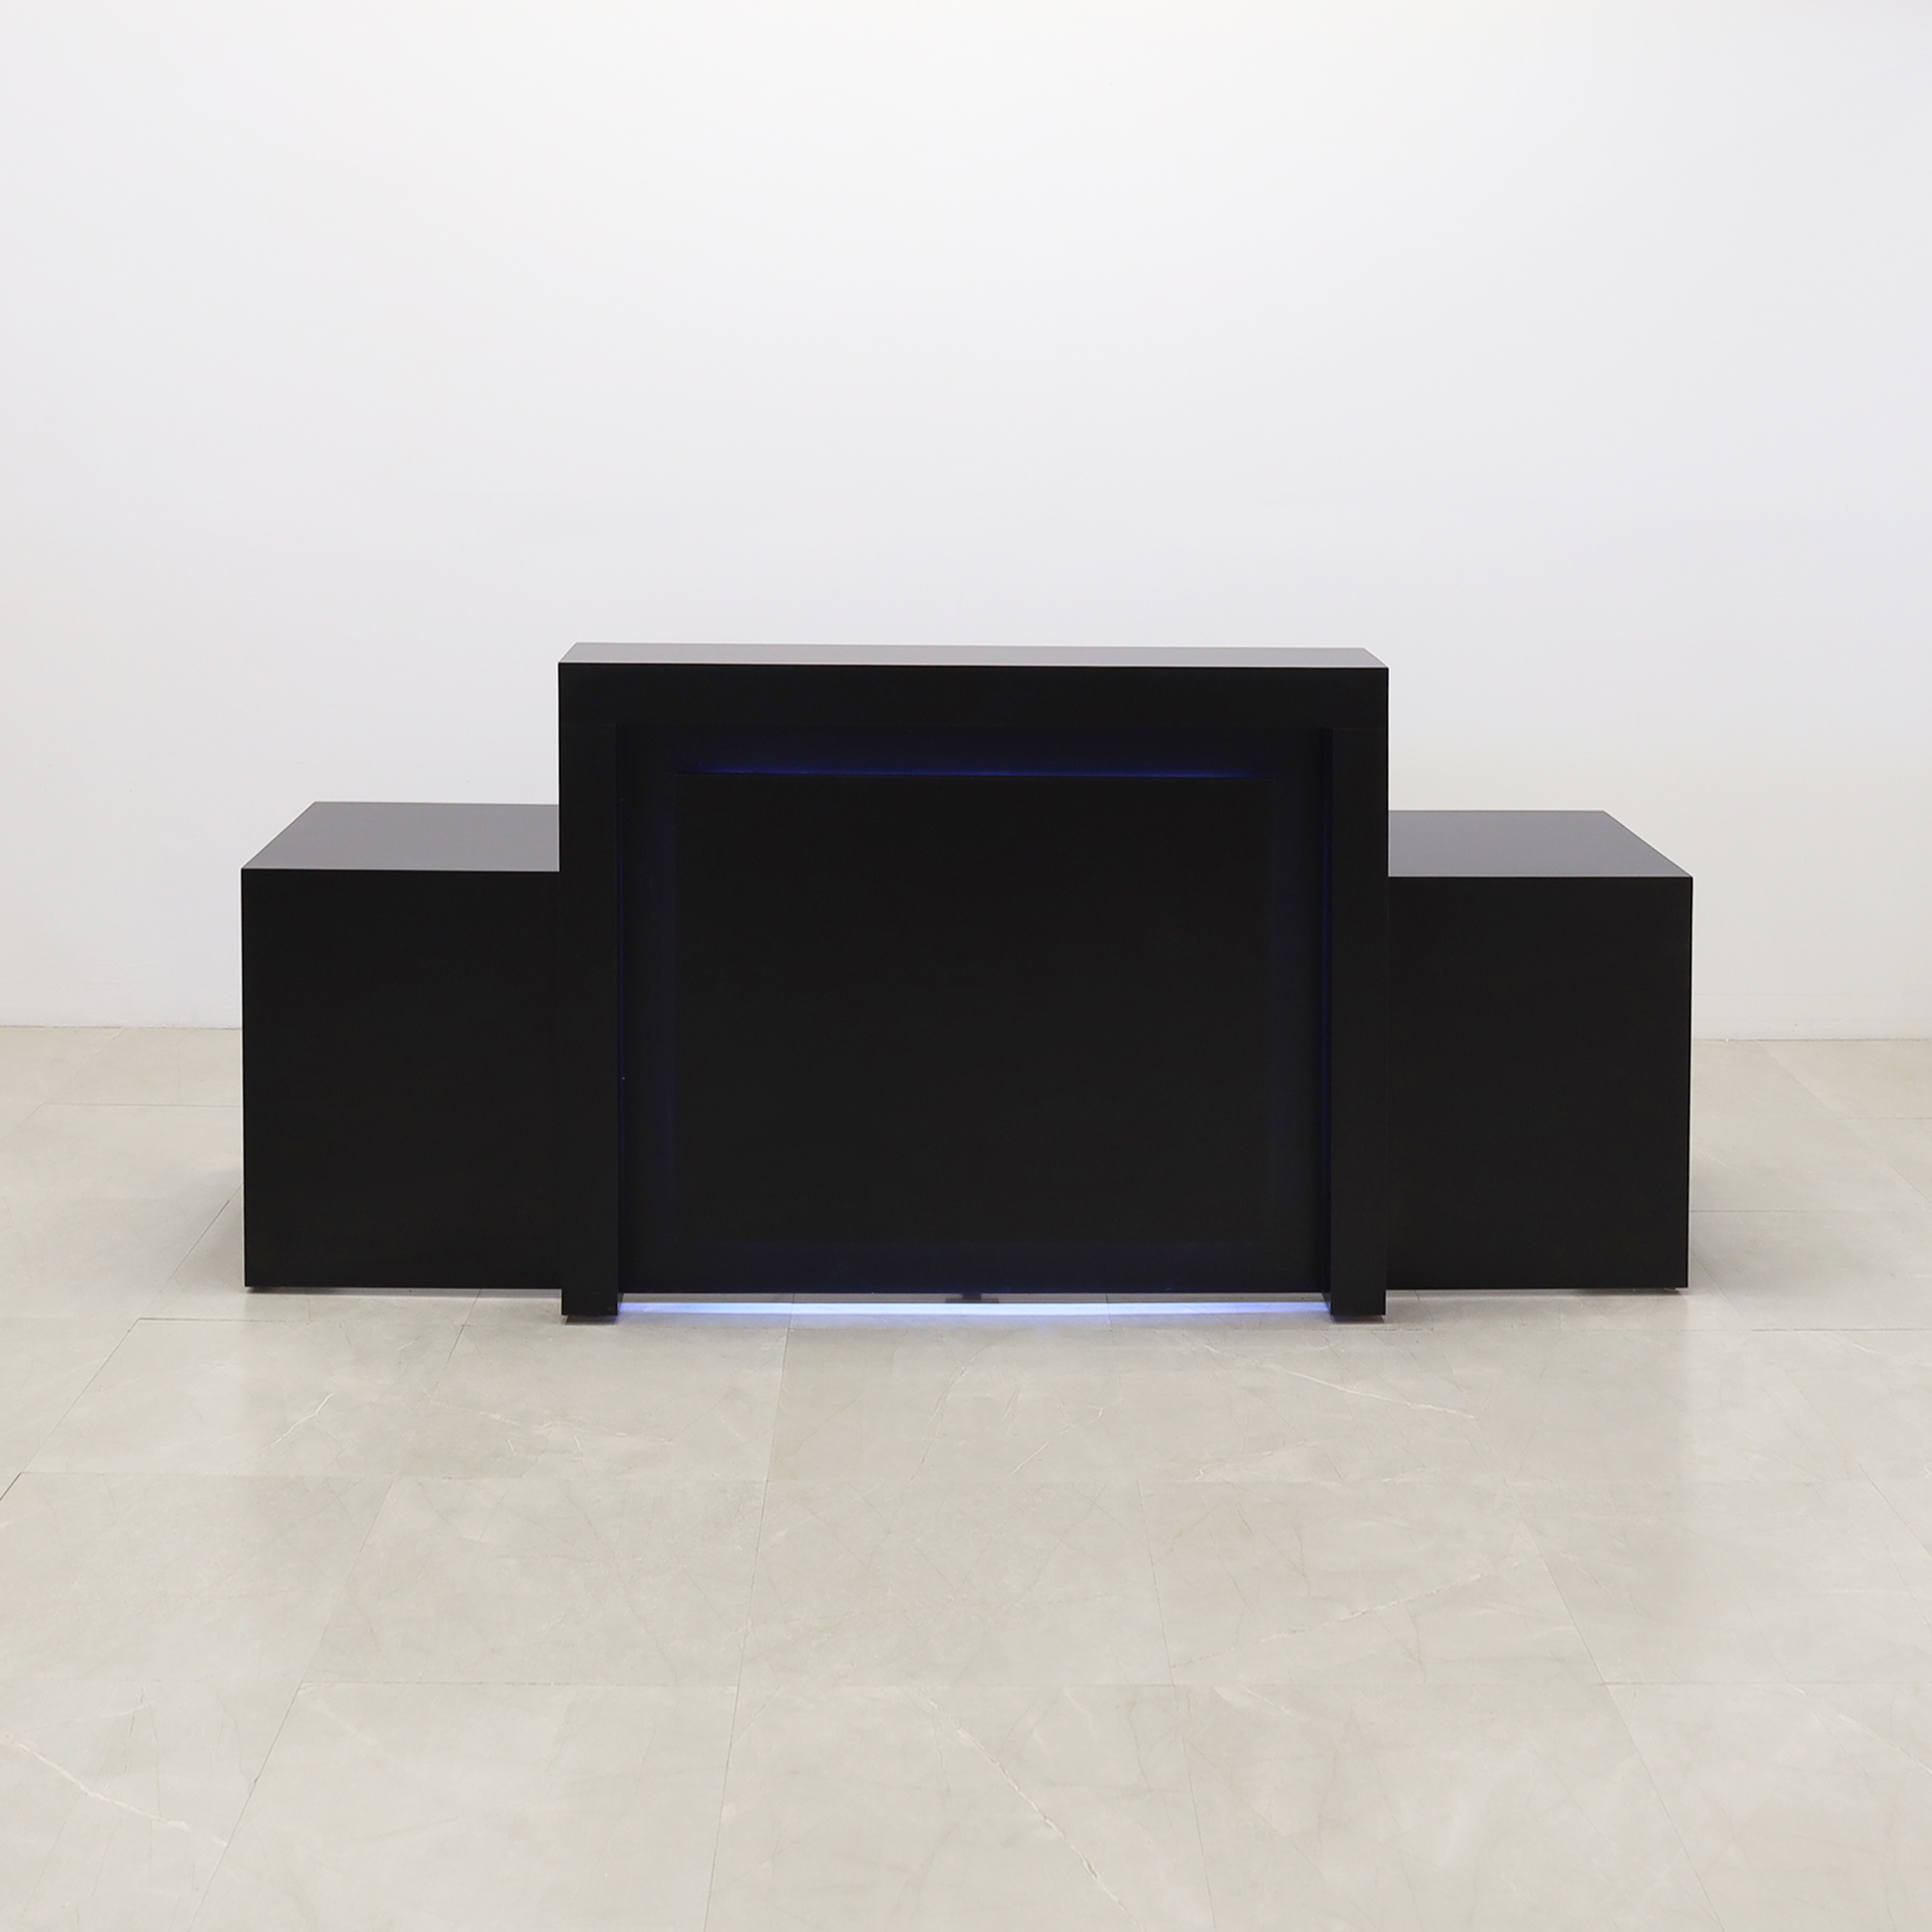 120 inches New York Extra Wide reception desk in black matte laminate finish desk, counter and front panel, with colored-LED shown here.